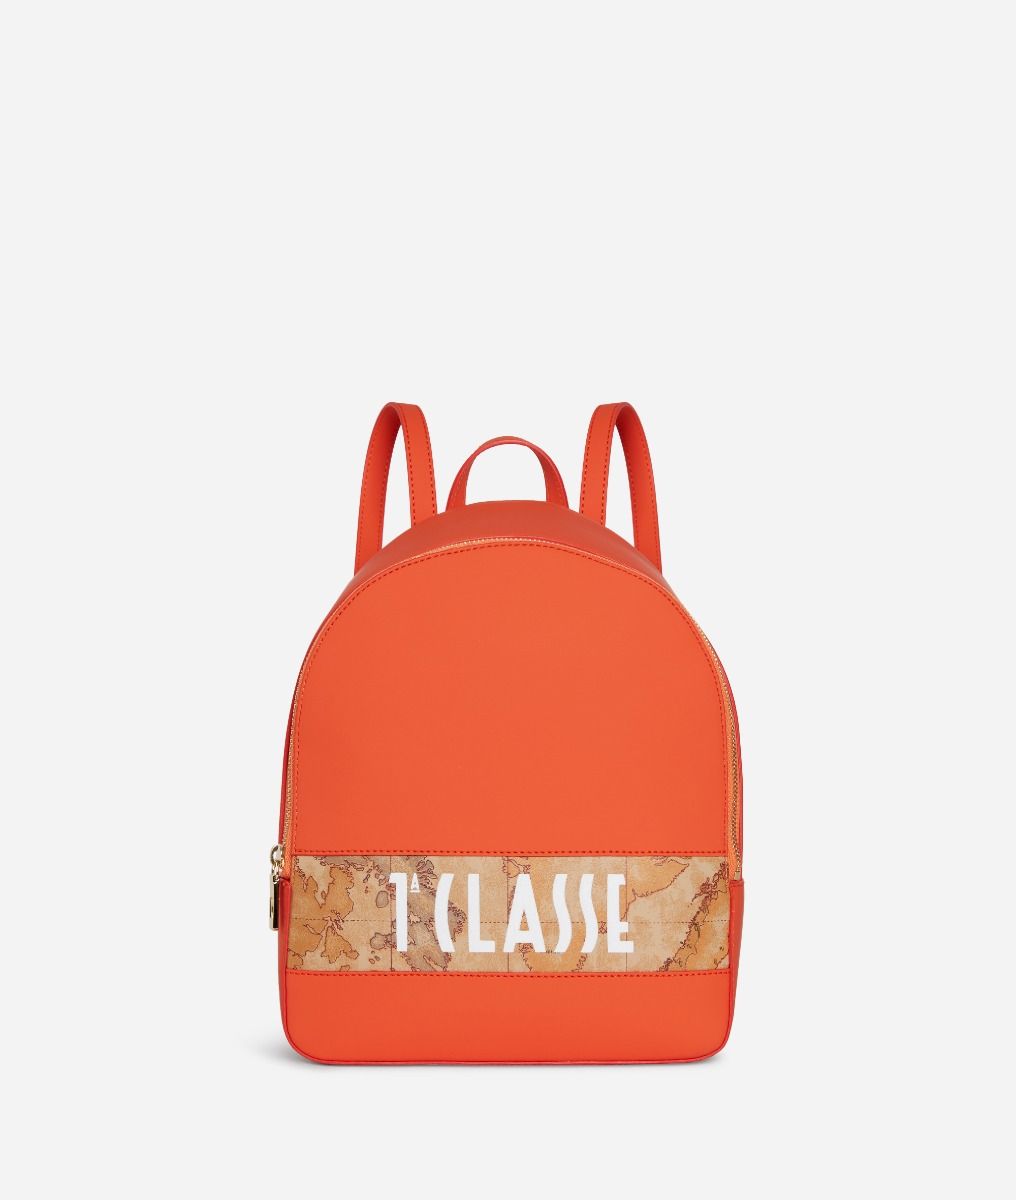 Geo Cruise Backpack with 1A Classe logo Orange,front